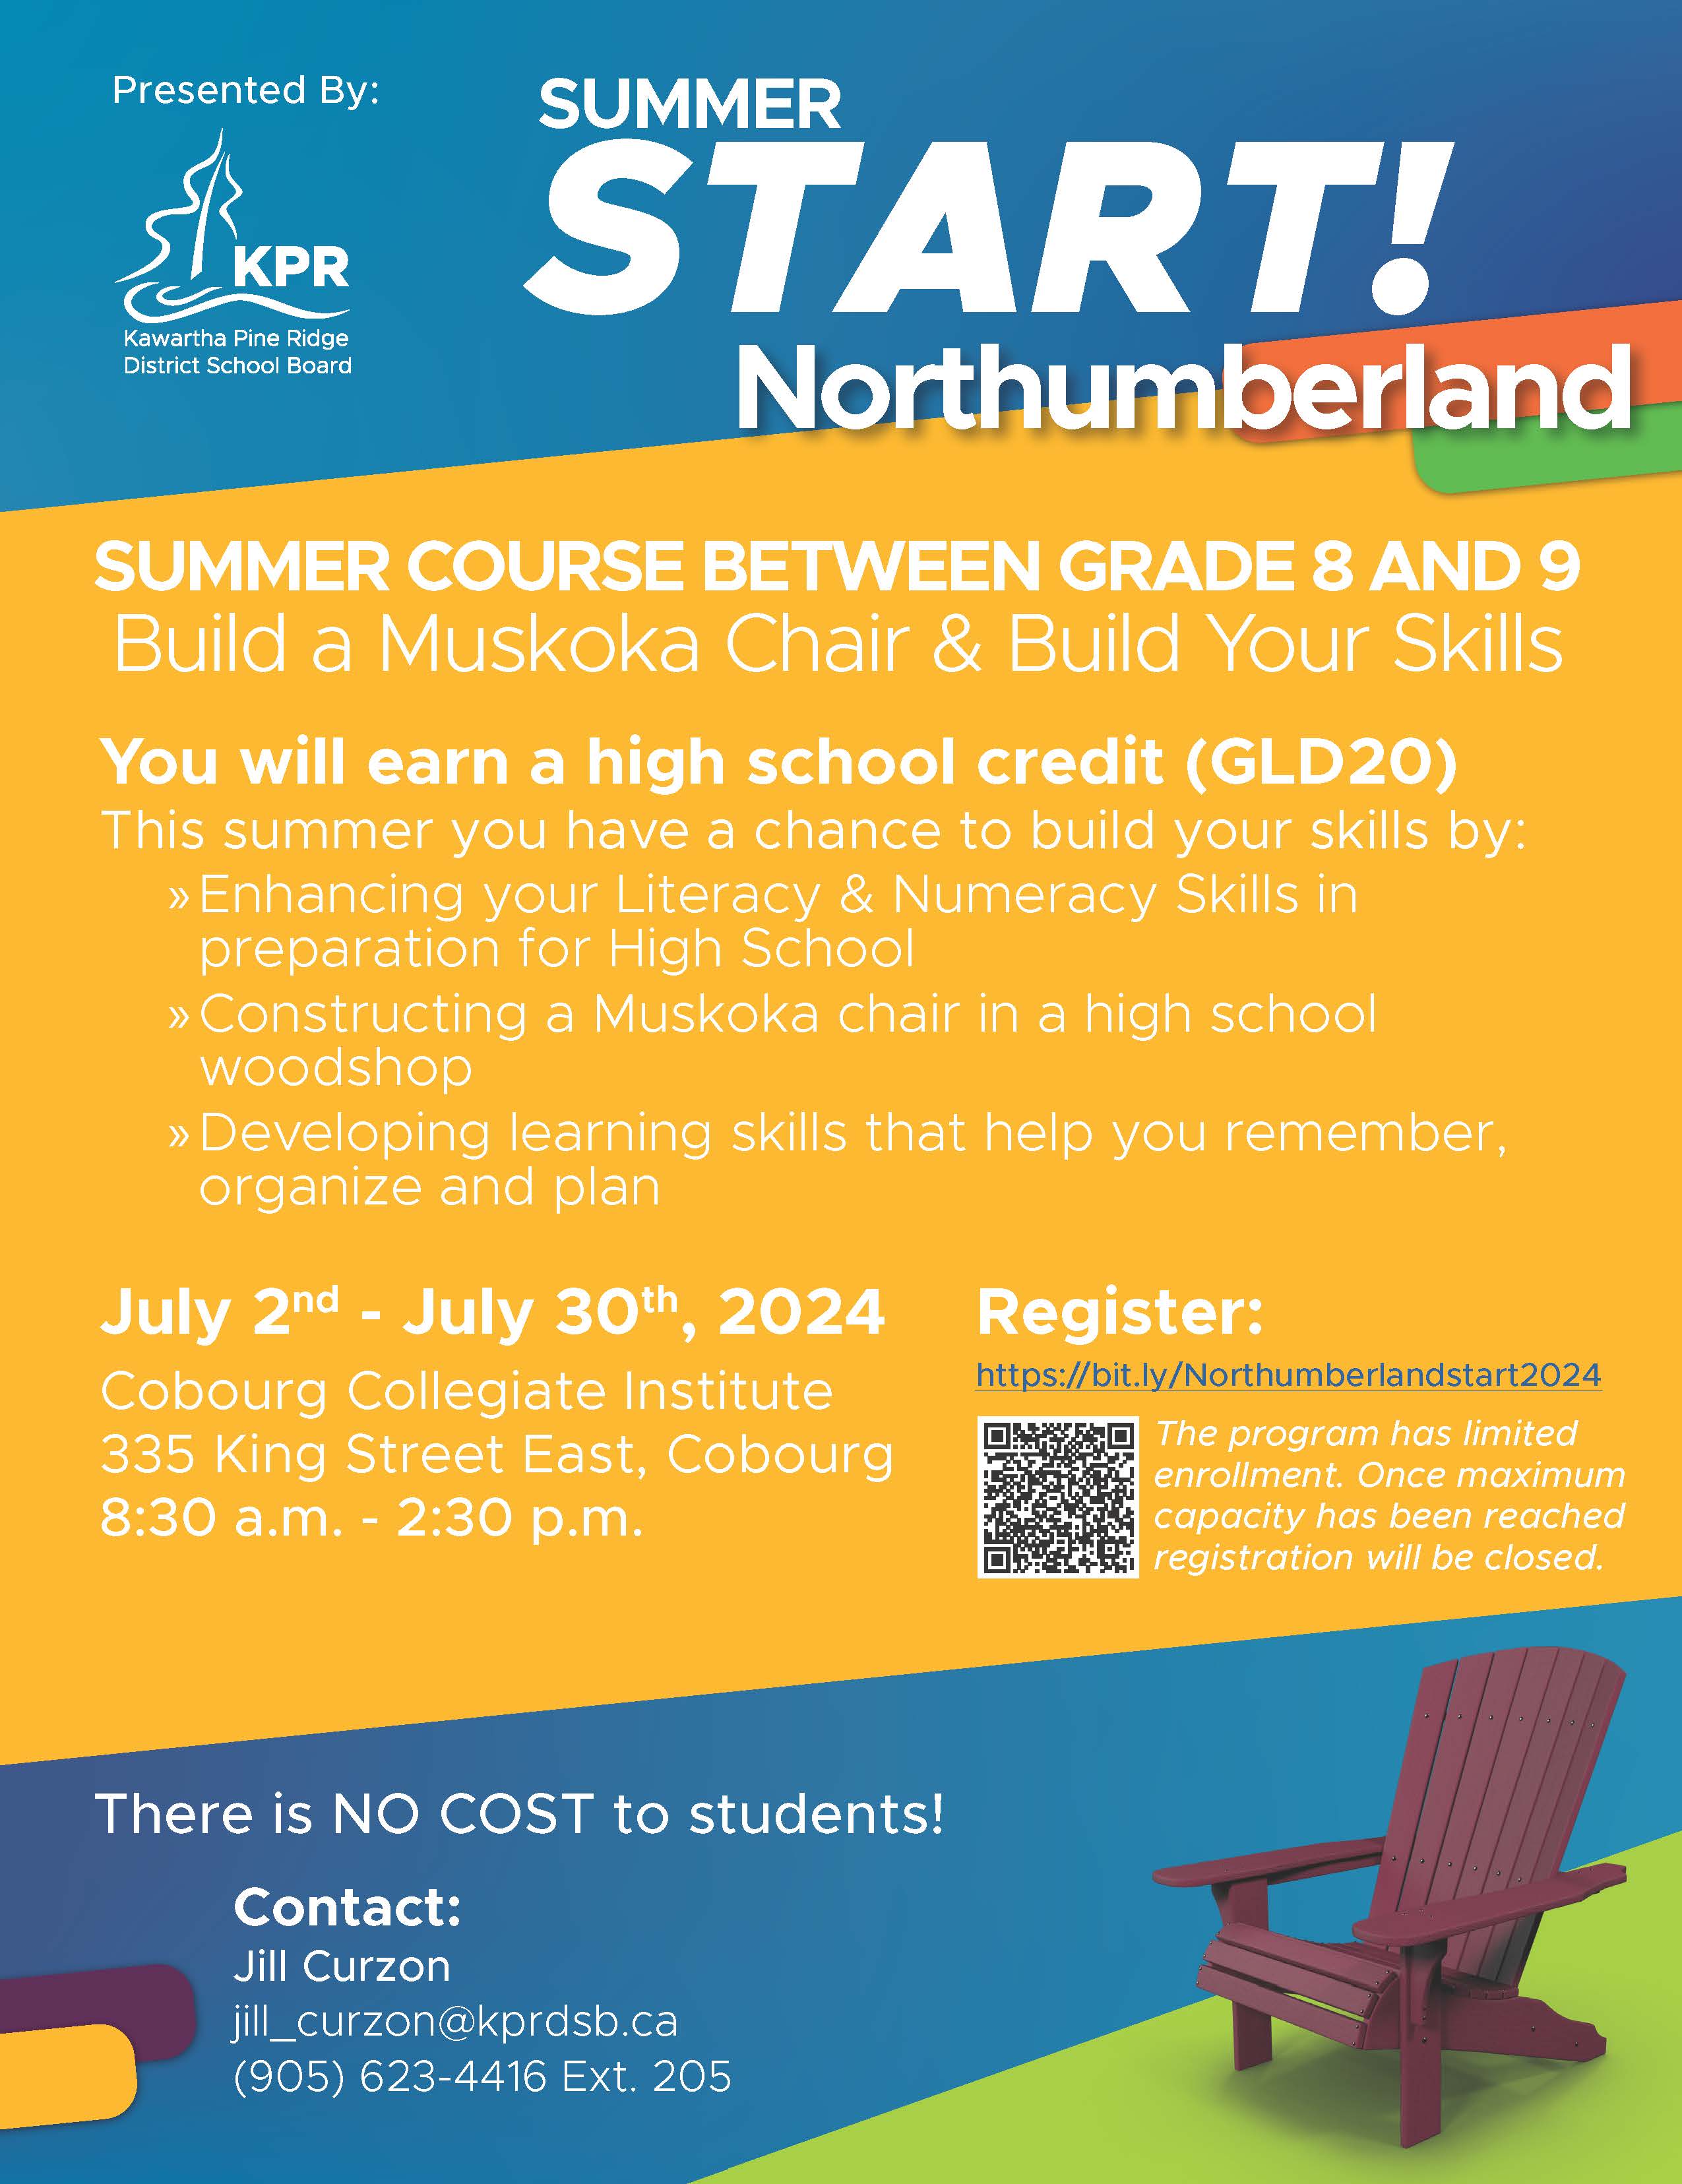 Summer School Poster for Northumberland